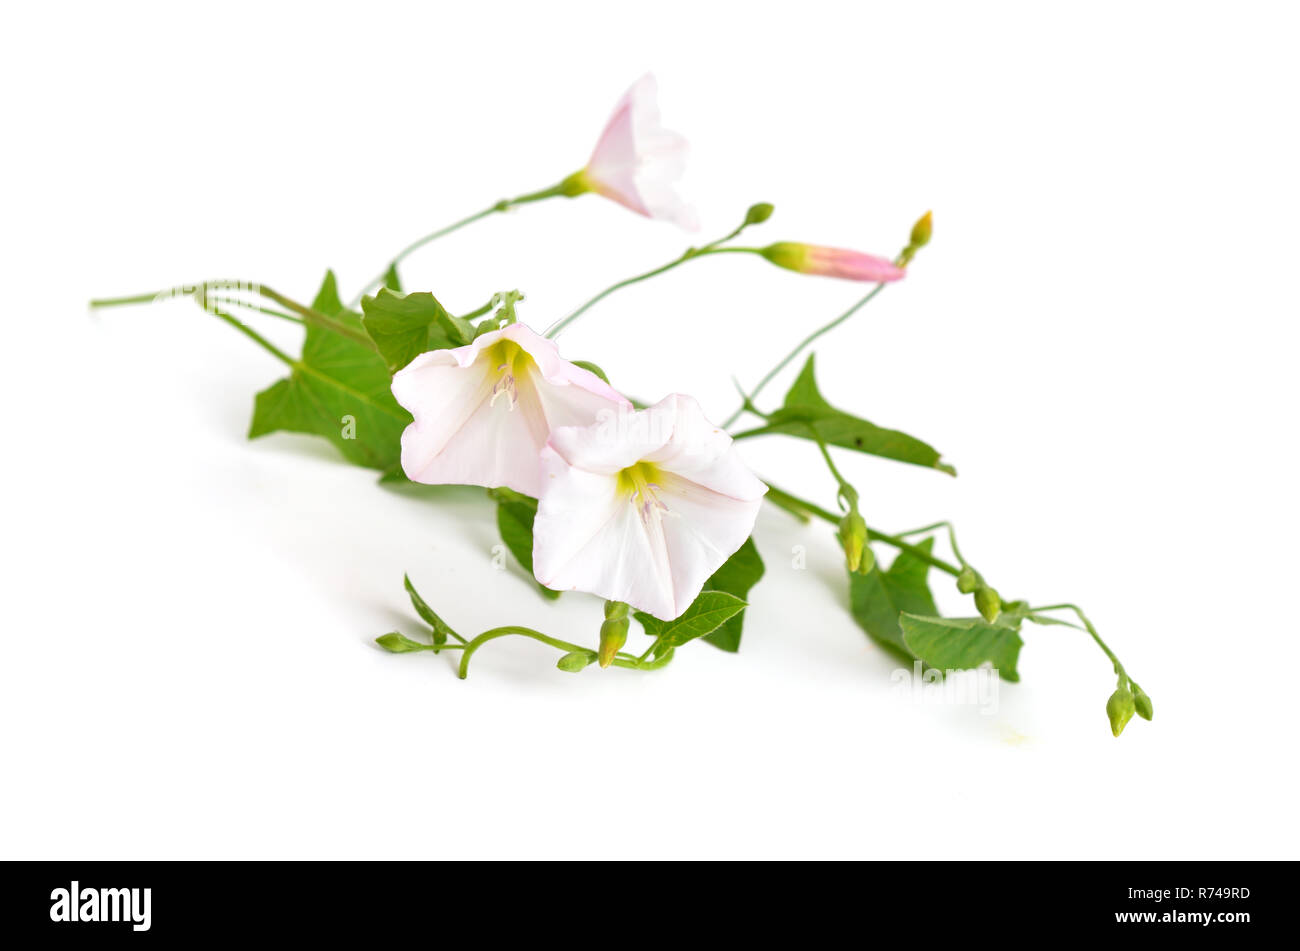 Convolvulus arvensis, field bindweed. Isolated on white background. Stock Photo